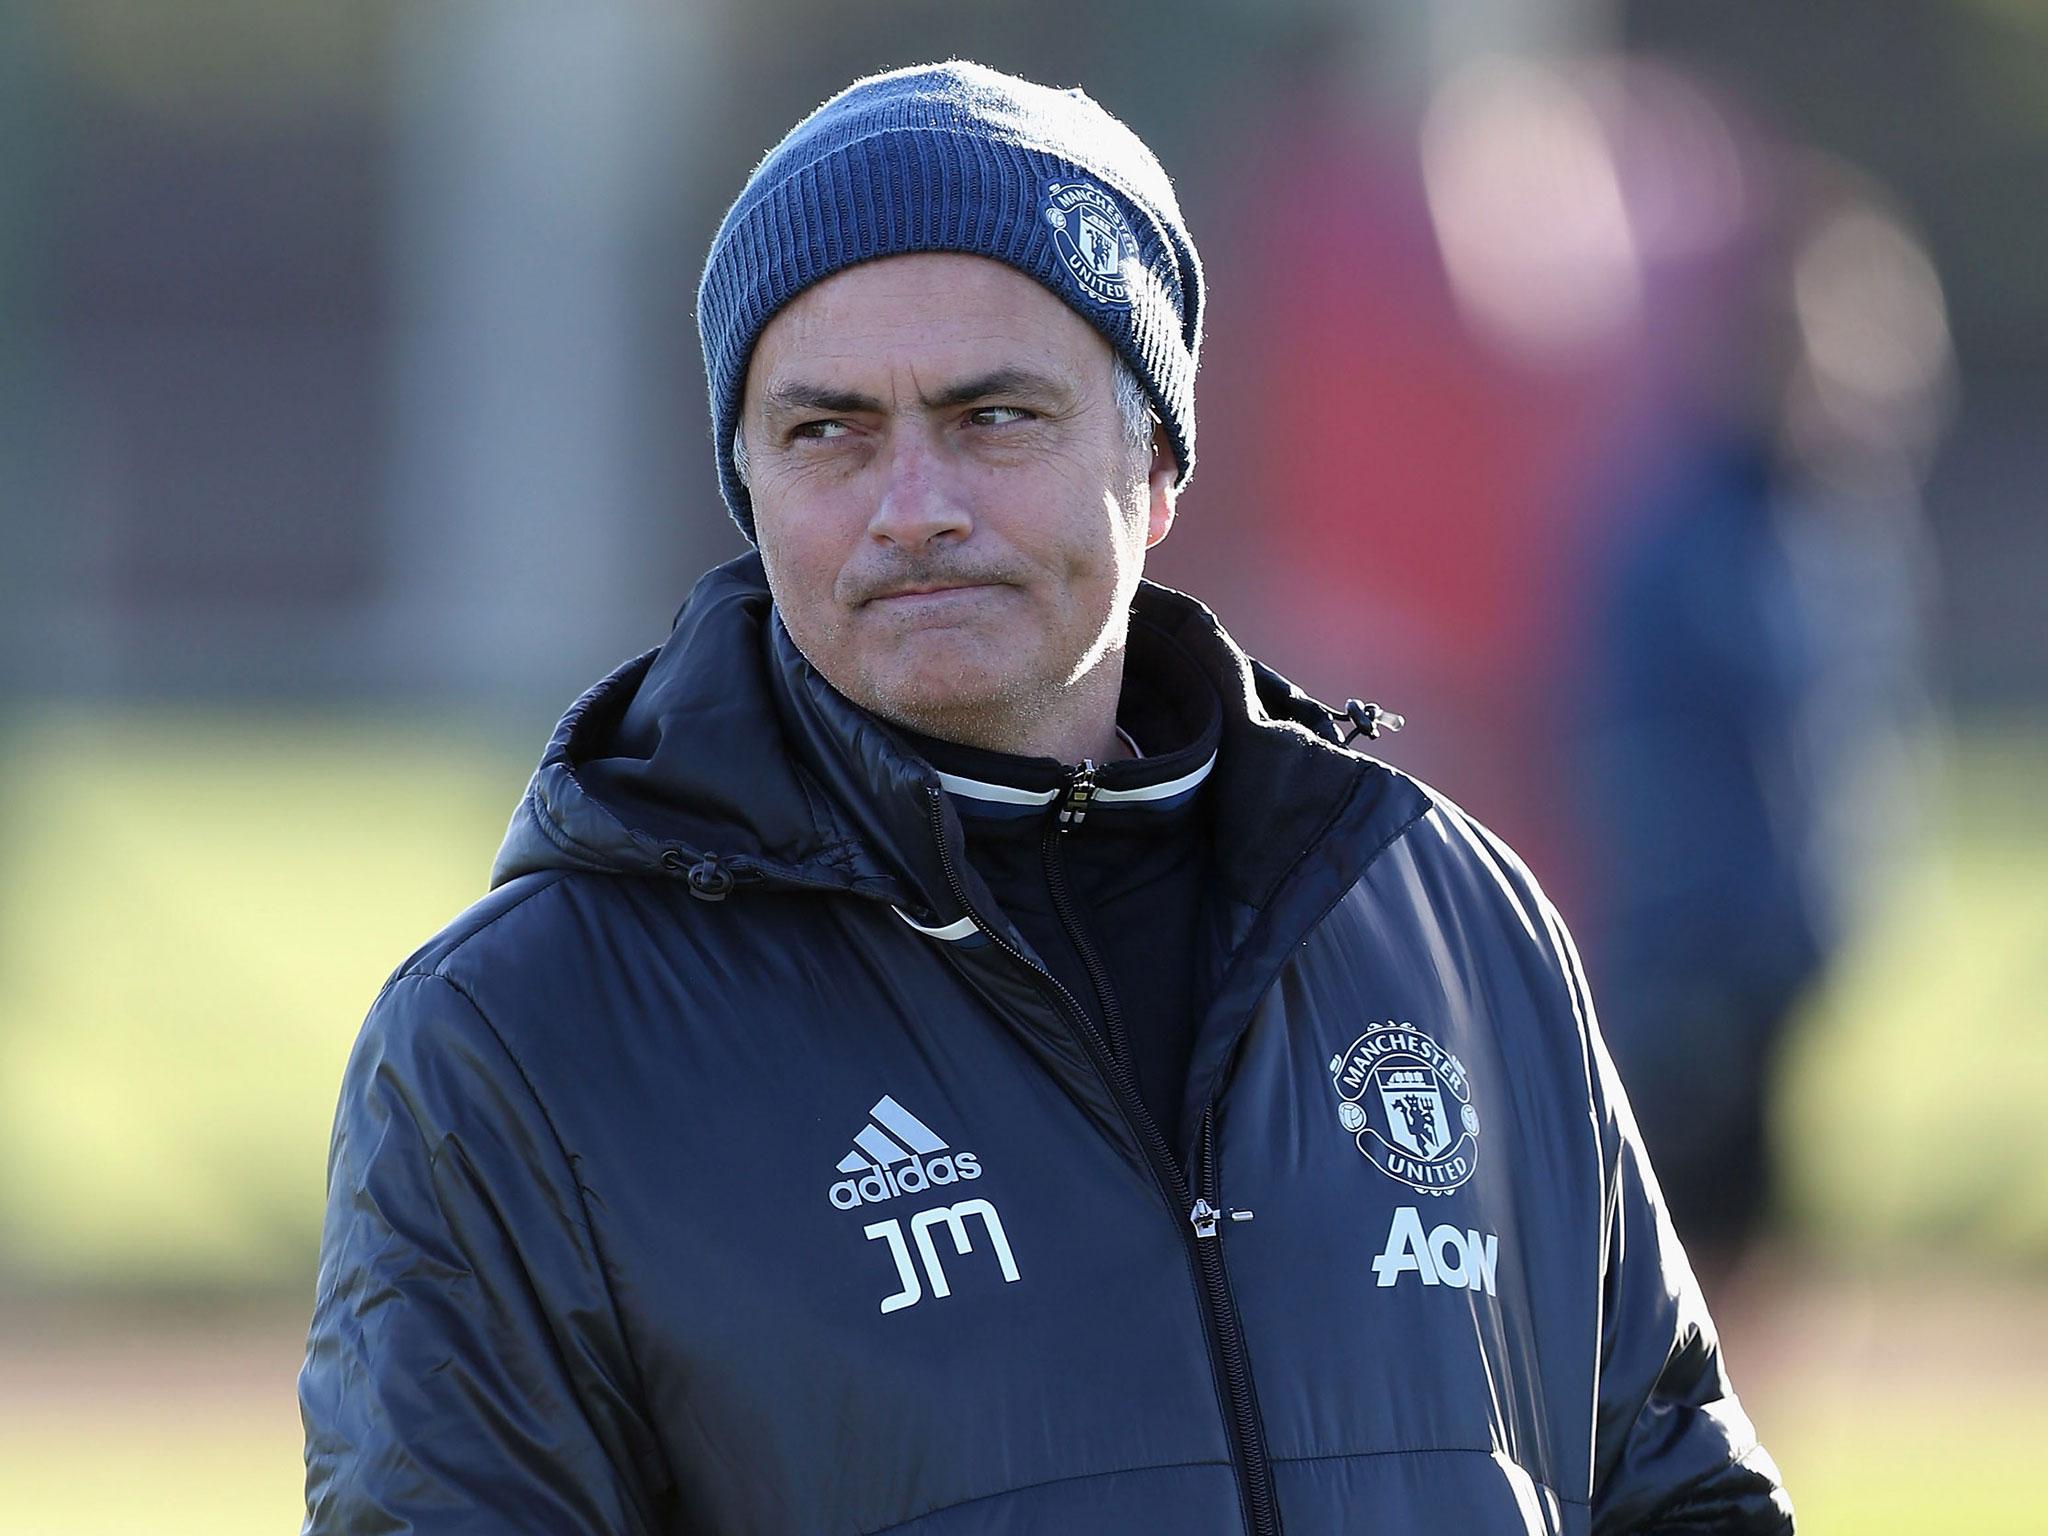 Jose Mourinho will be allowed to take to the Old Trafford dugout when Manchester United face West Ham